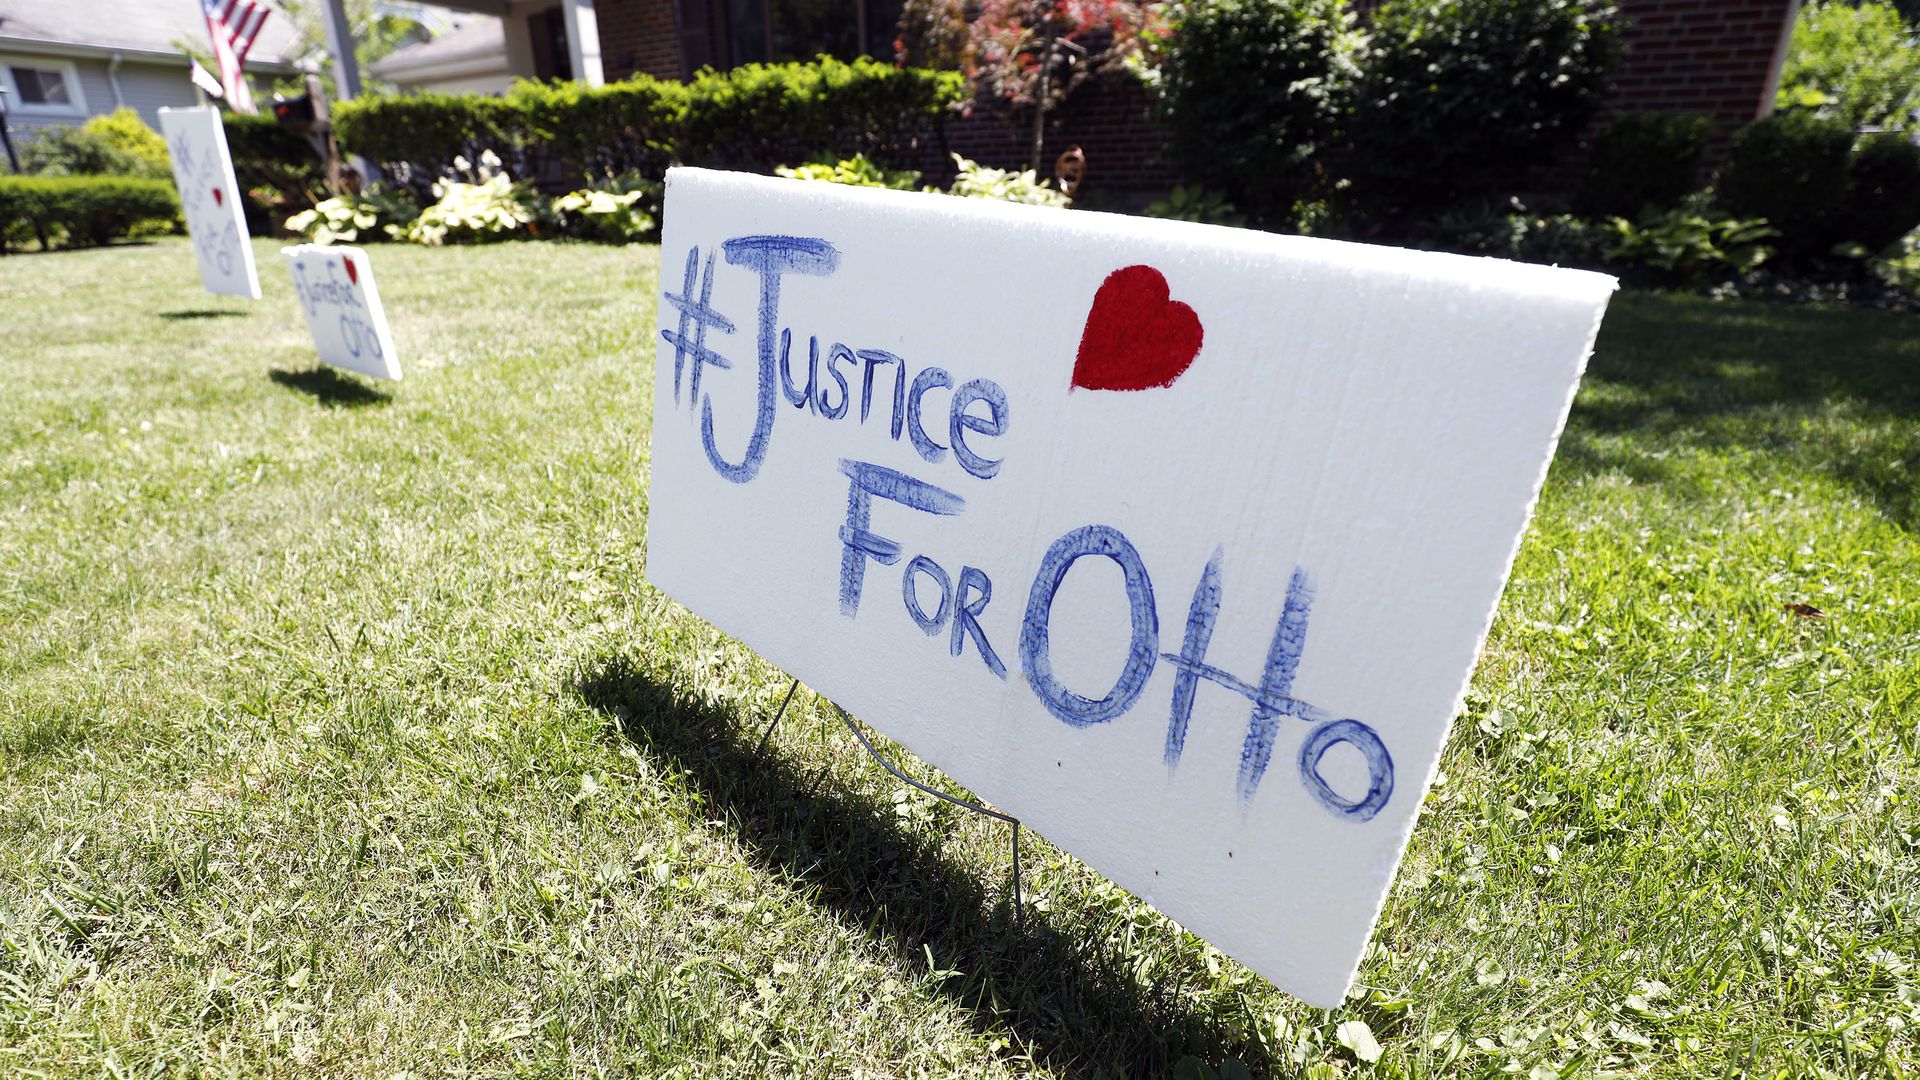 A lawn sign in Wyoming, Ohio, that says "Justice for Otto"